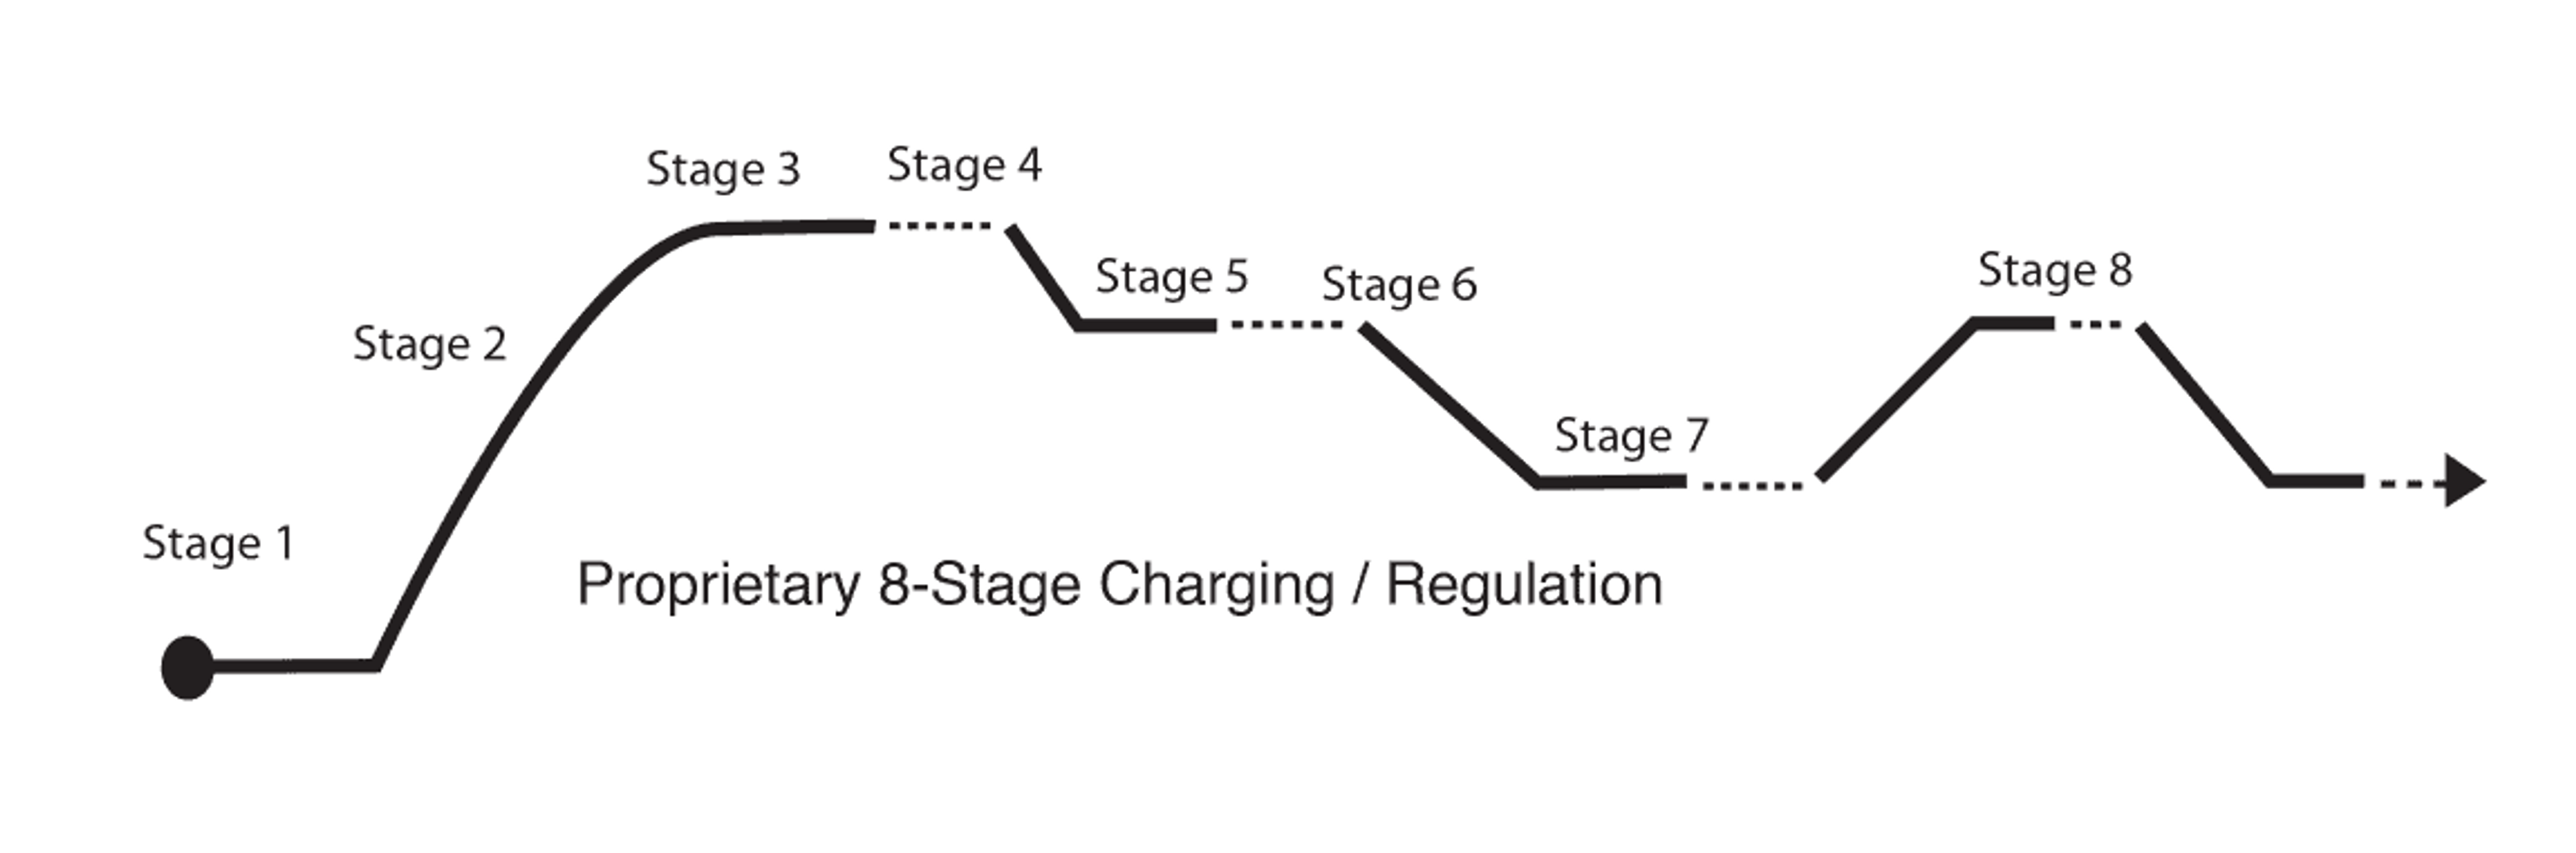 Proprietary 8-stage charging and regulation